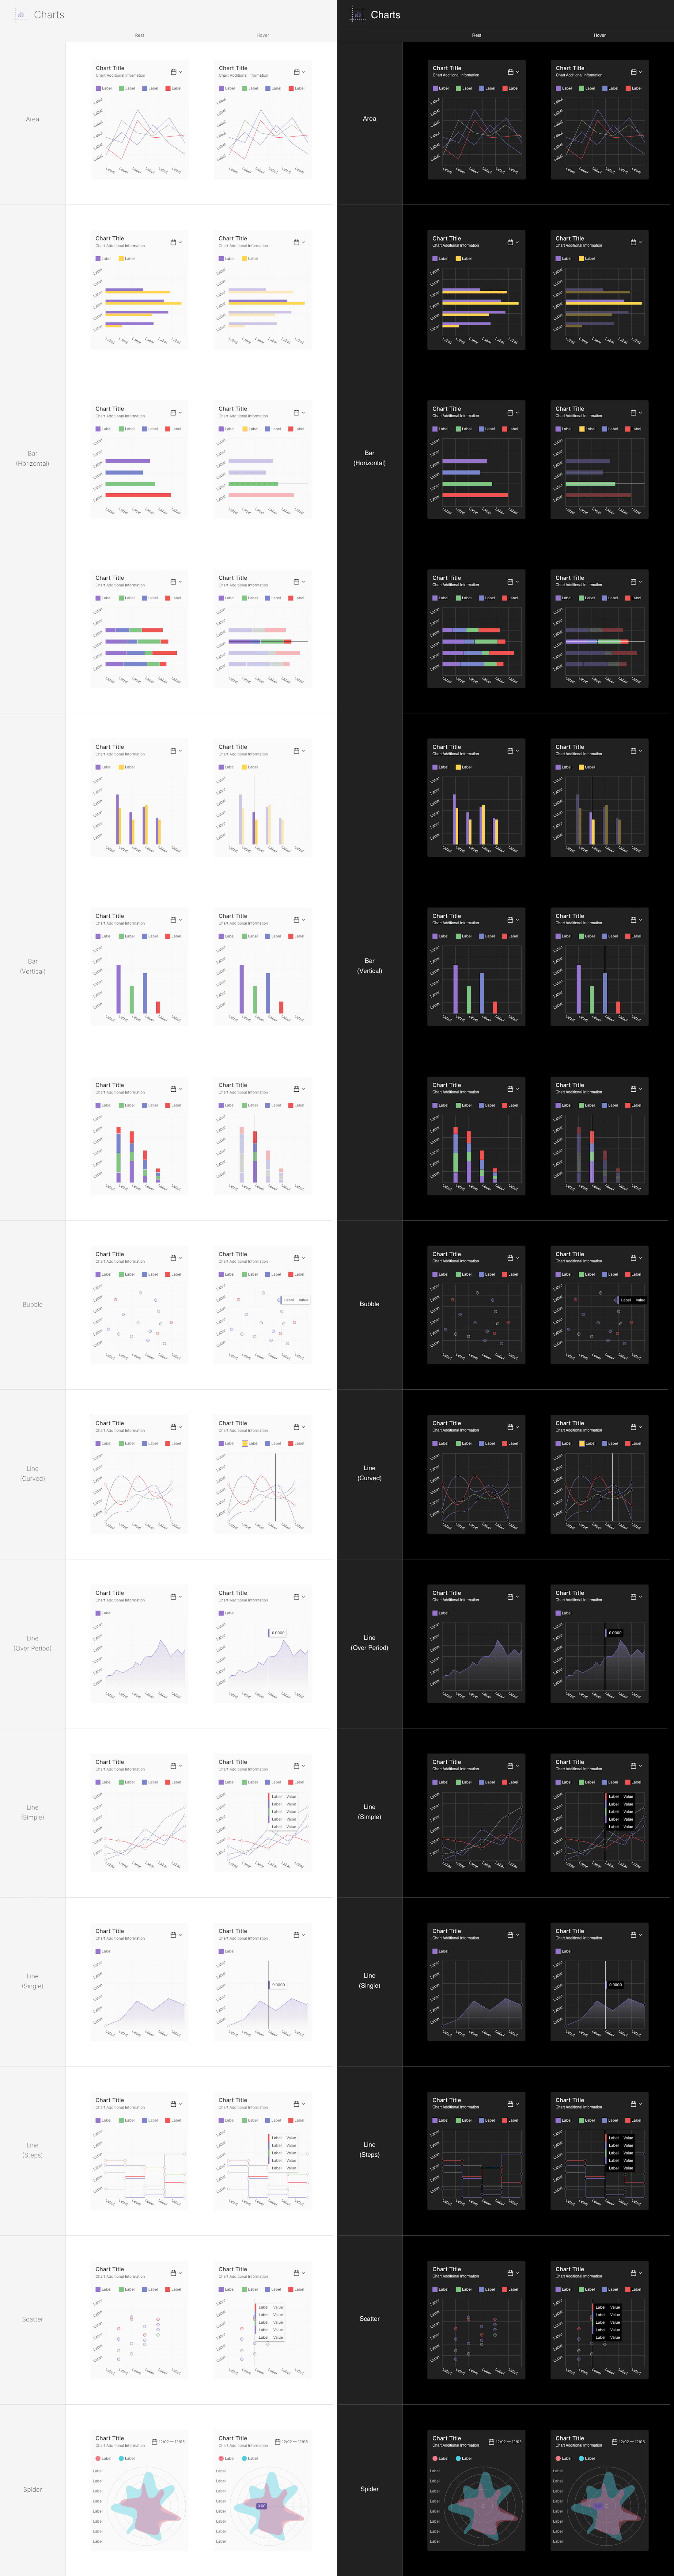 Components - 11 Mobile Charts